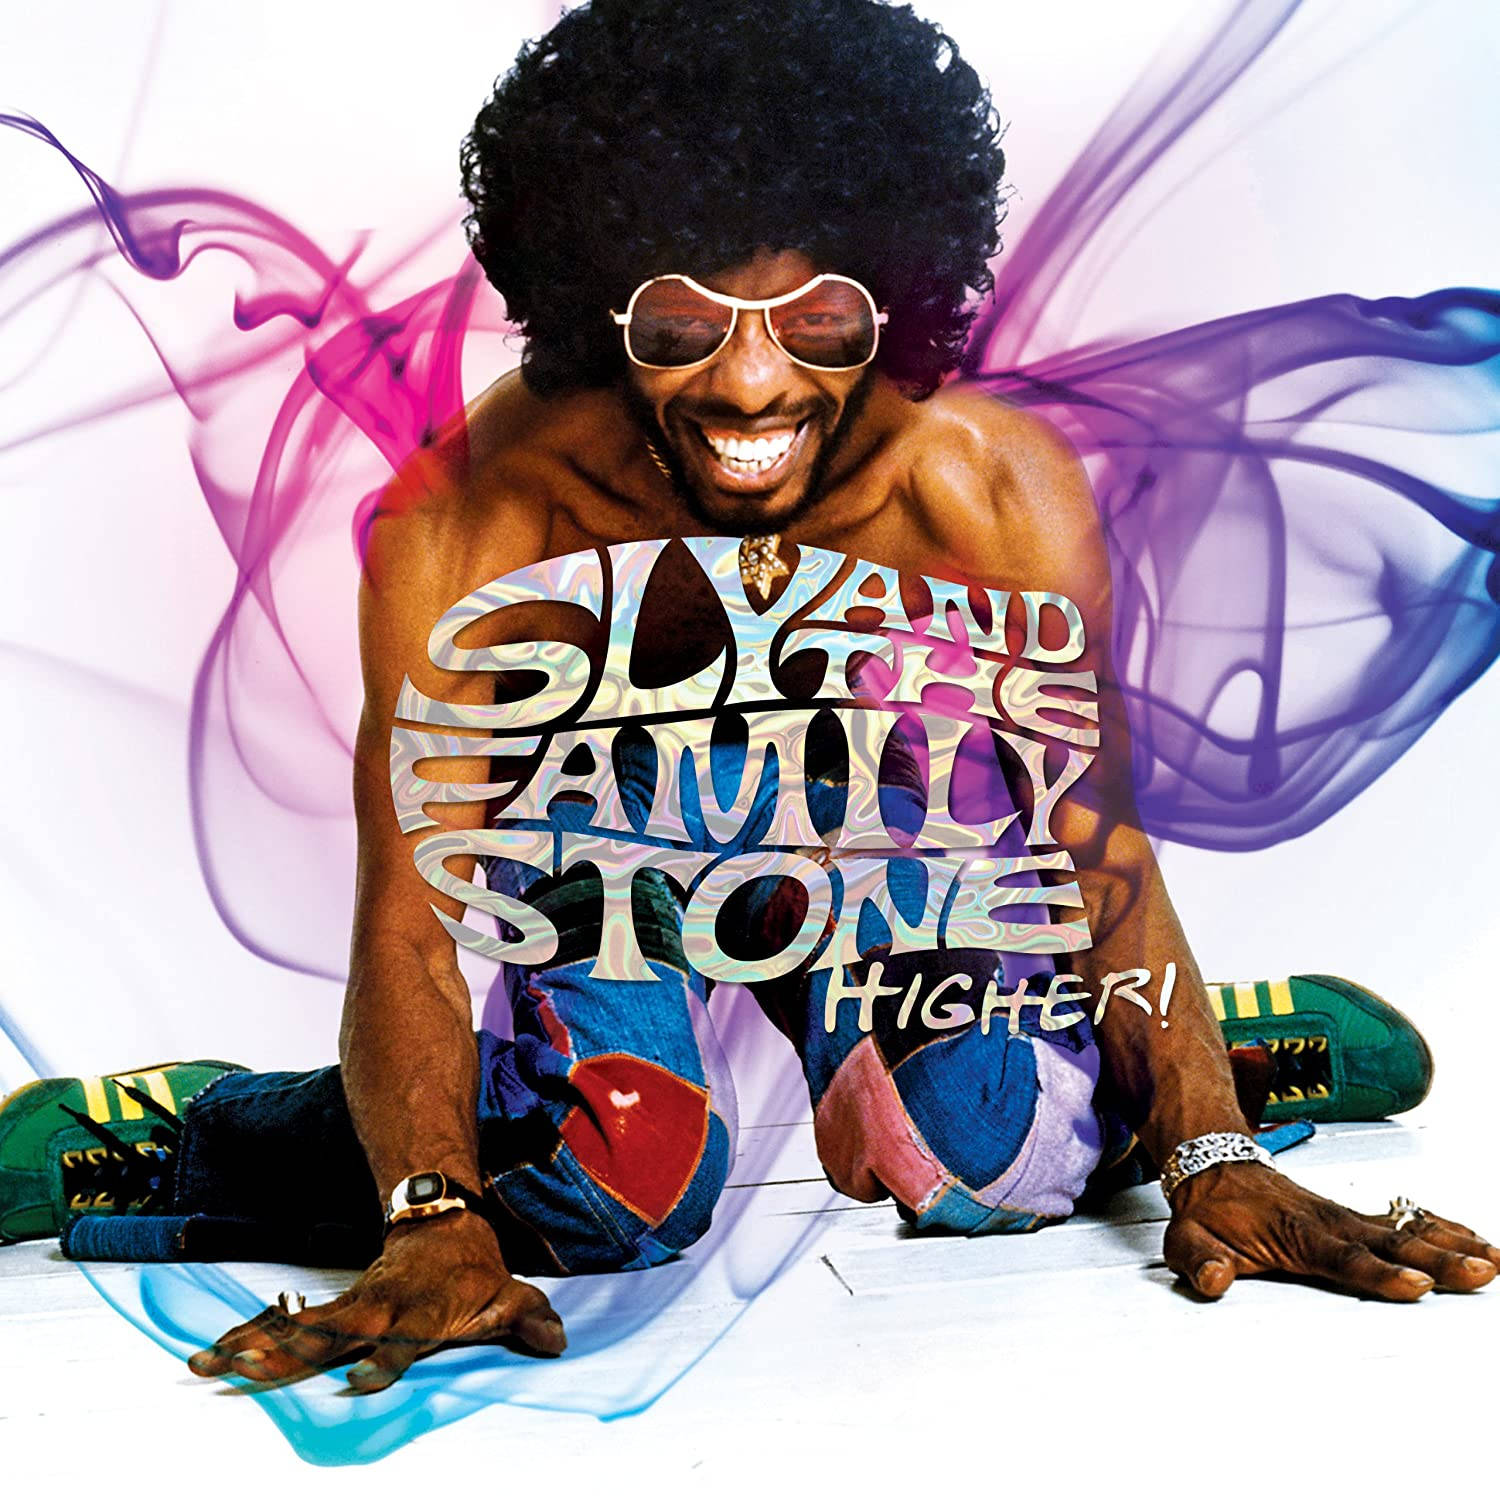 Sly And The Family Stone Digital Art Wallpaper